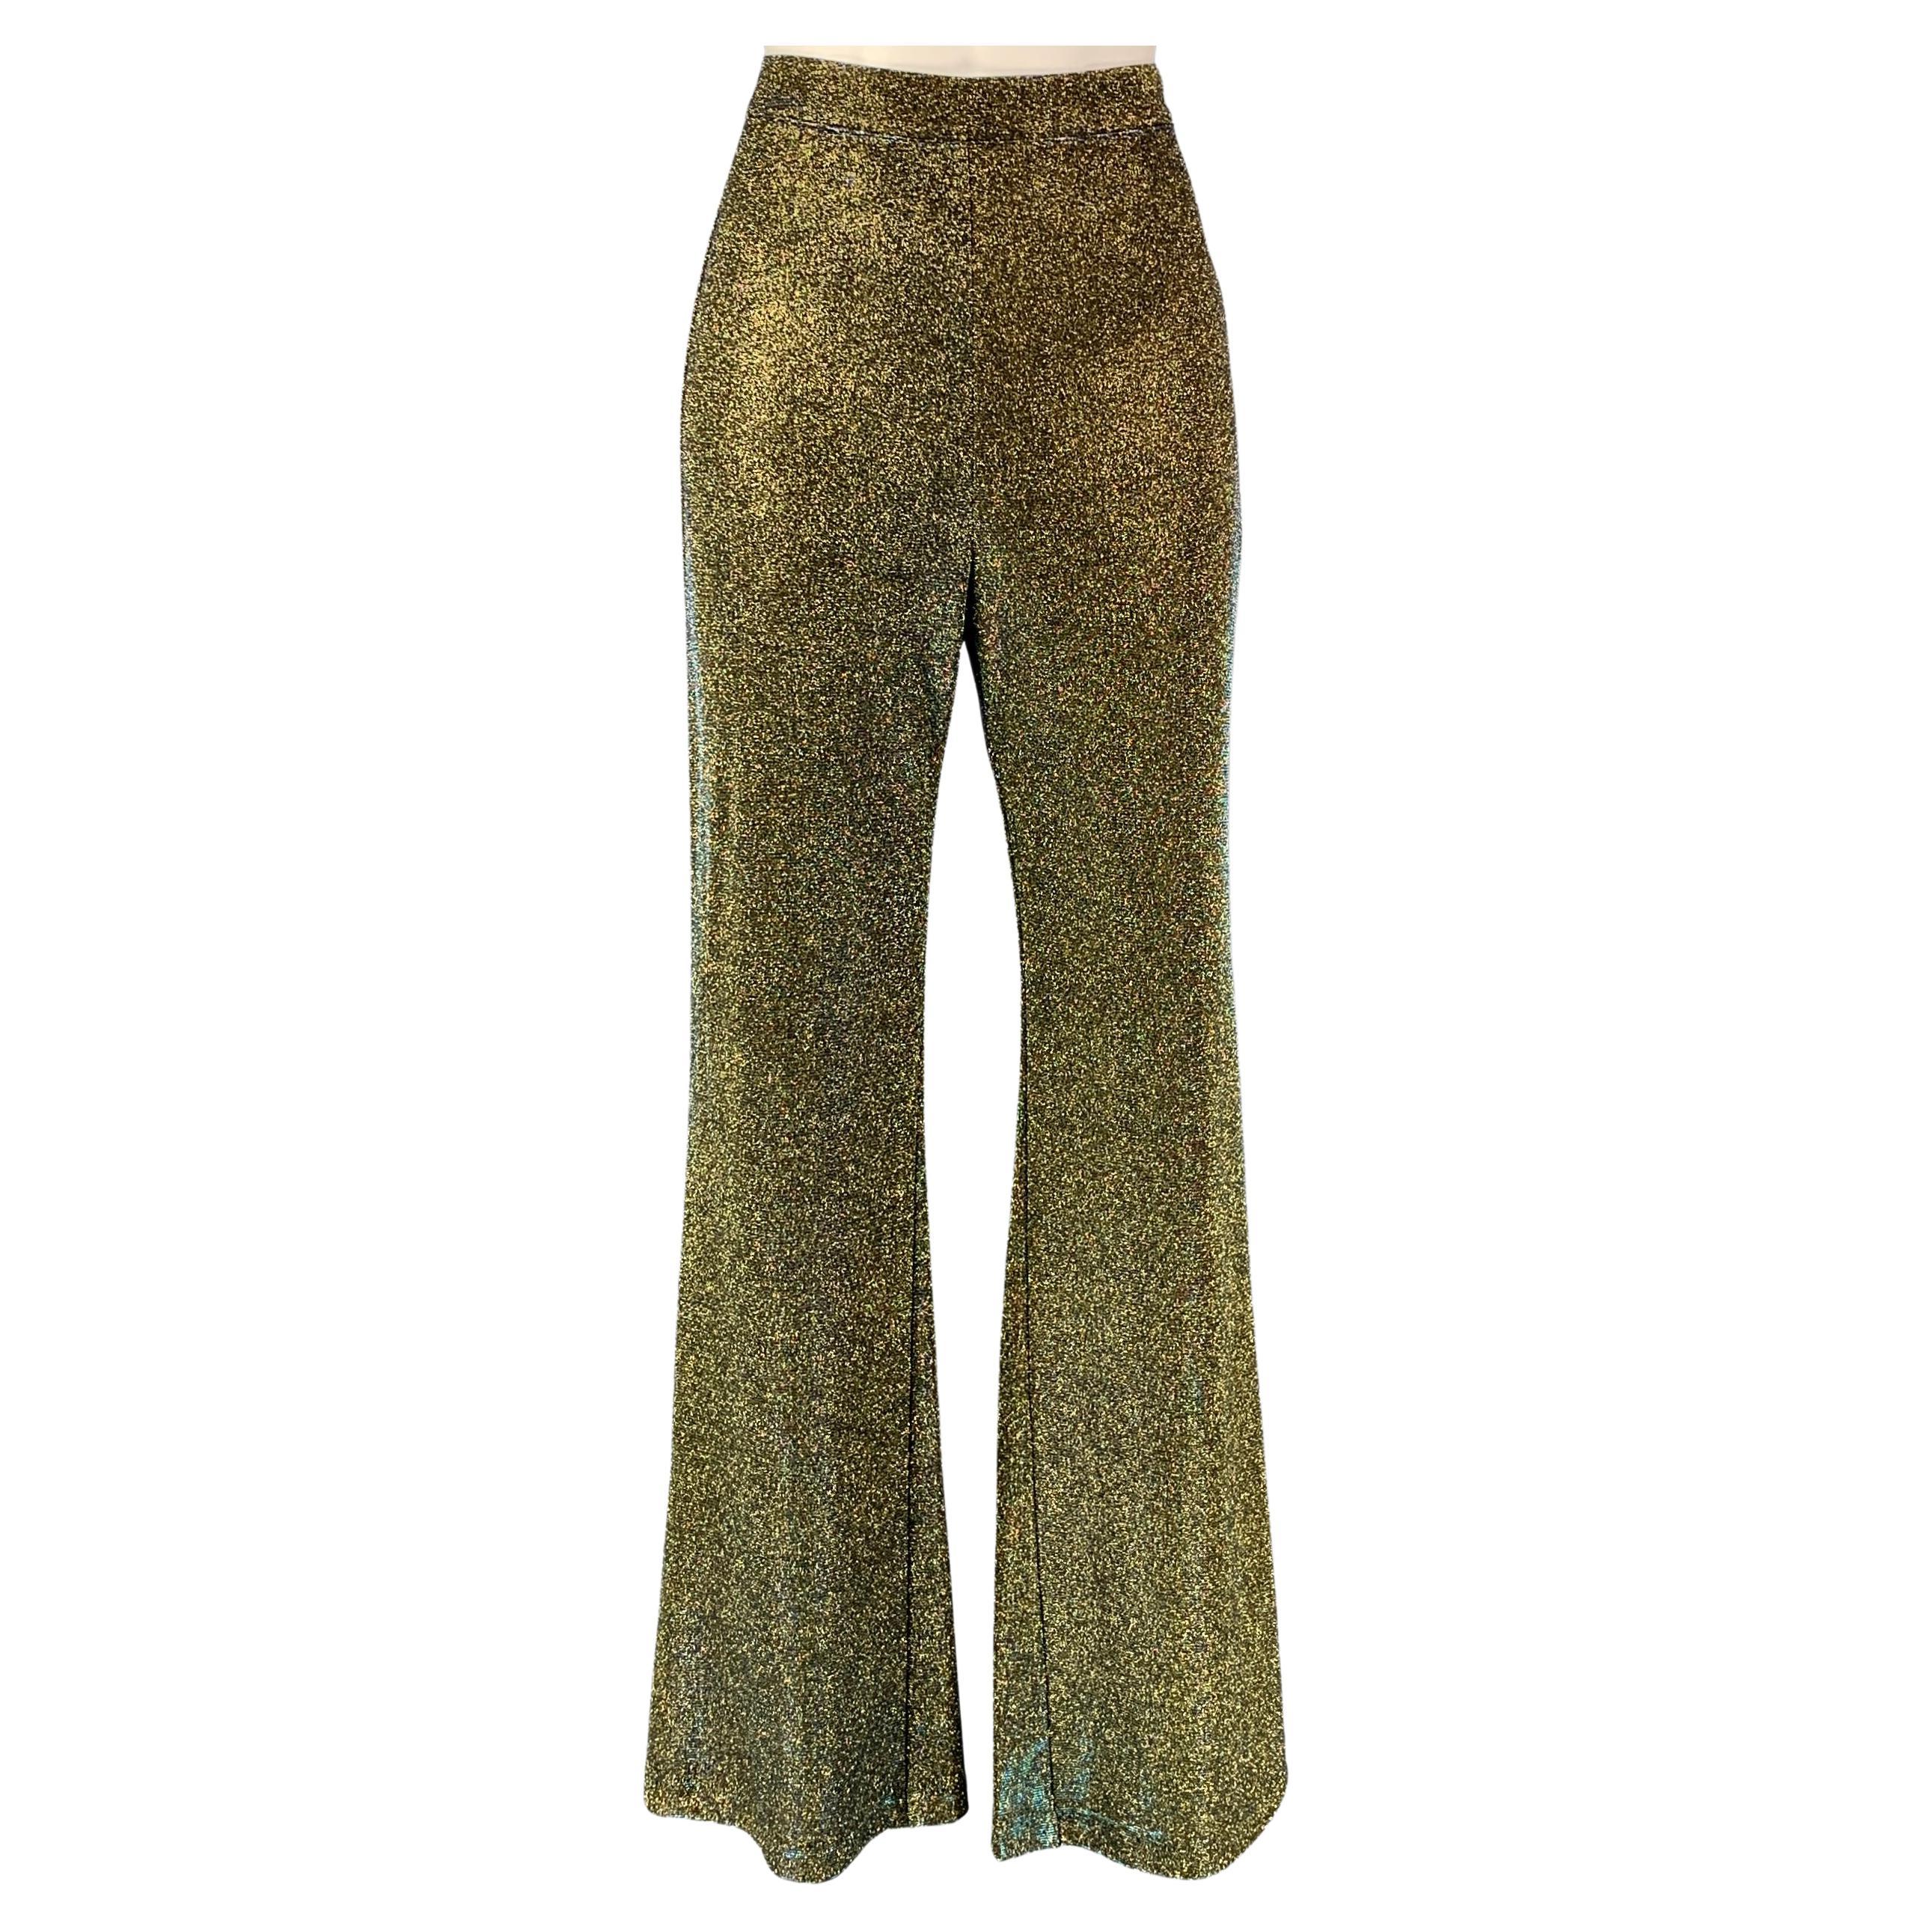 1970s Campus Casuals Panne Velvet Harlequin Pattern Palazzo Pants For ...